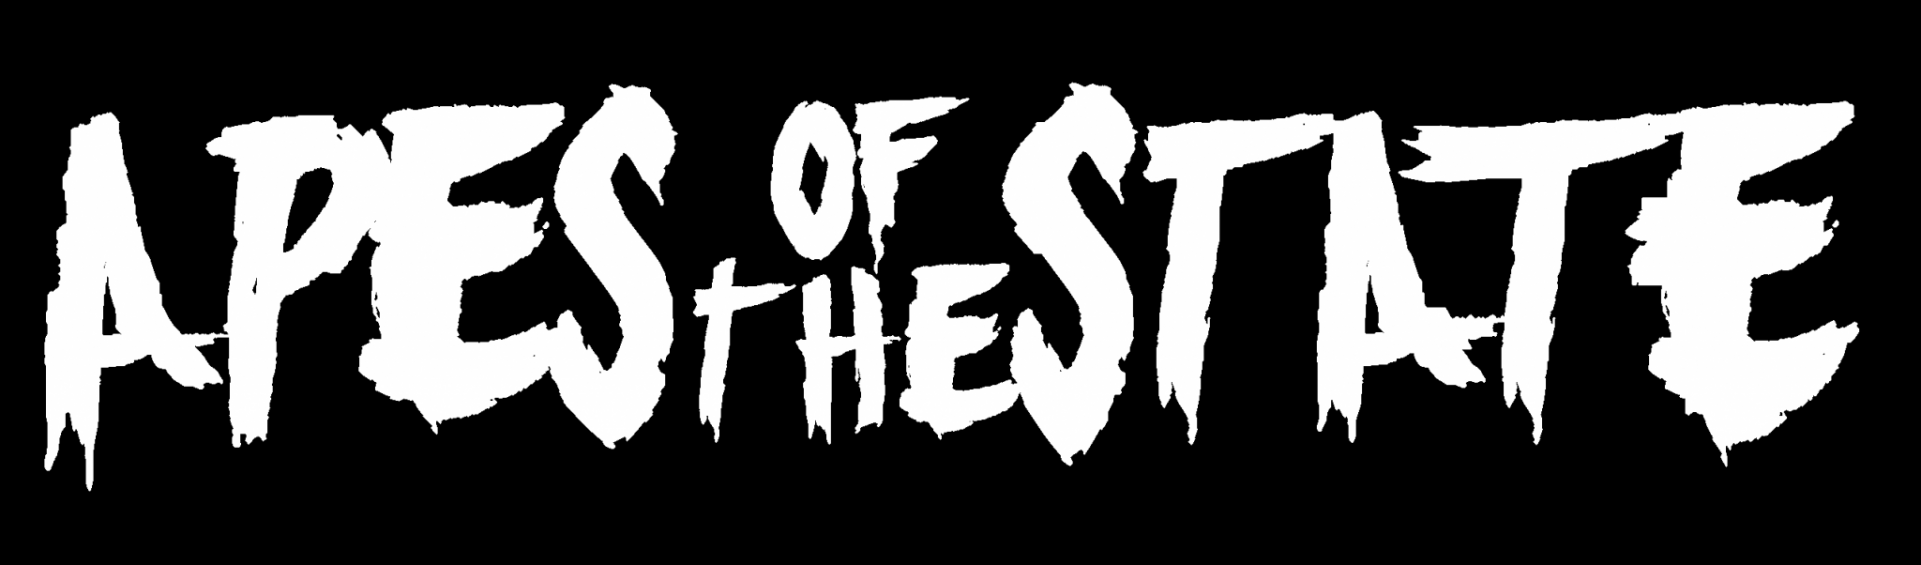 Apes of the State font?